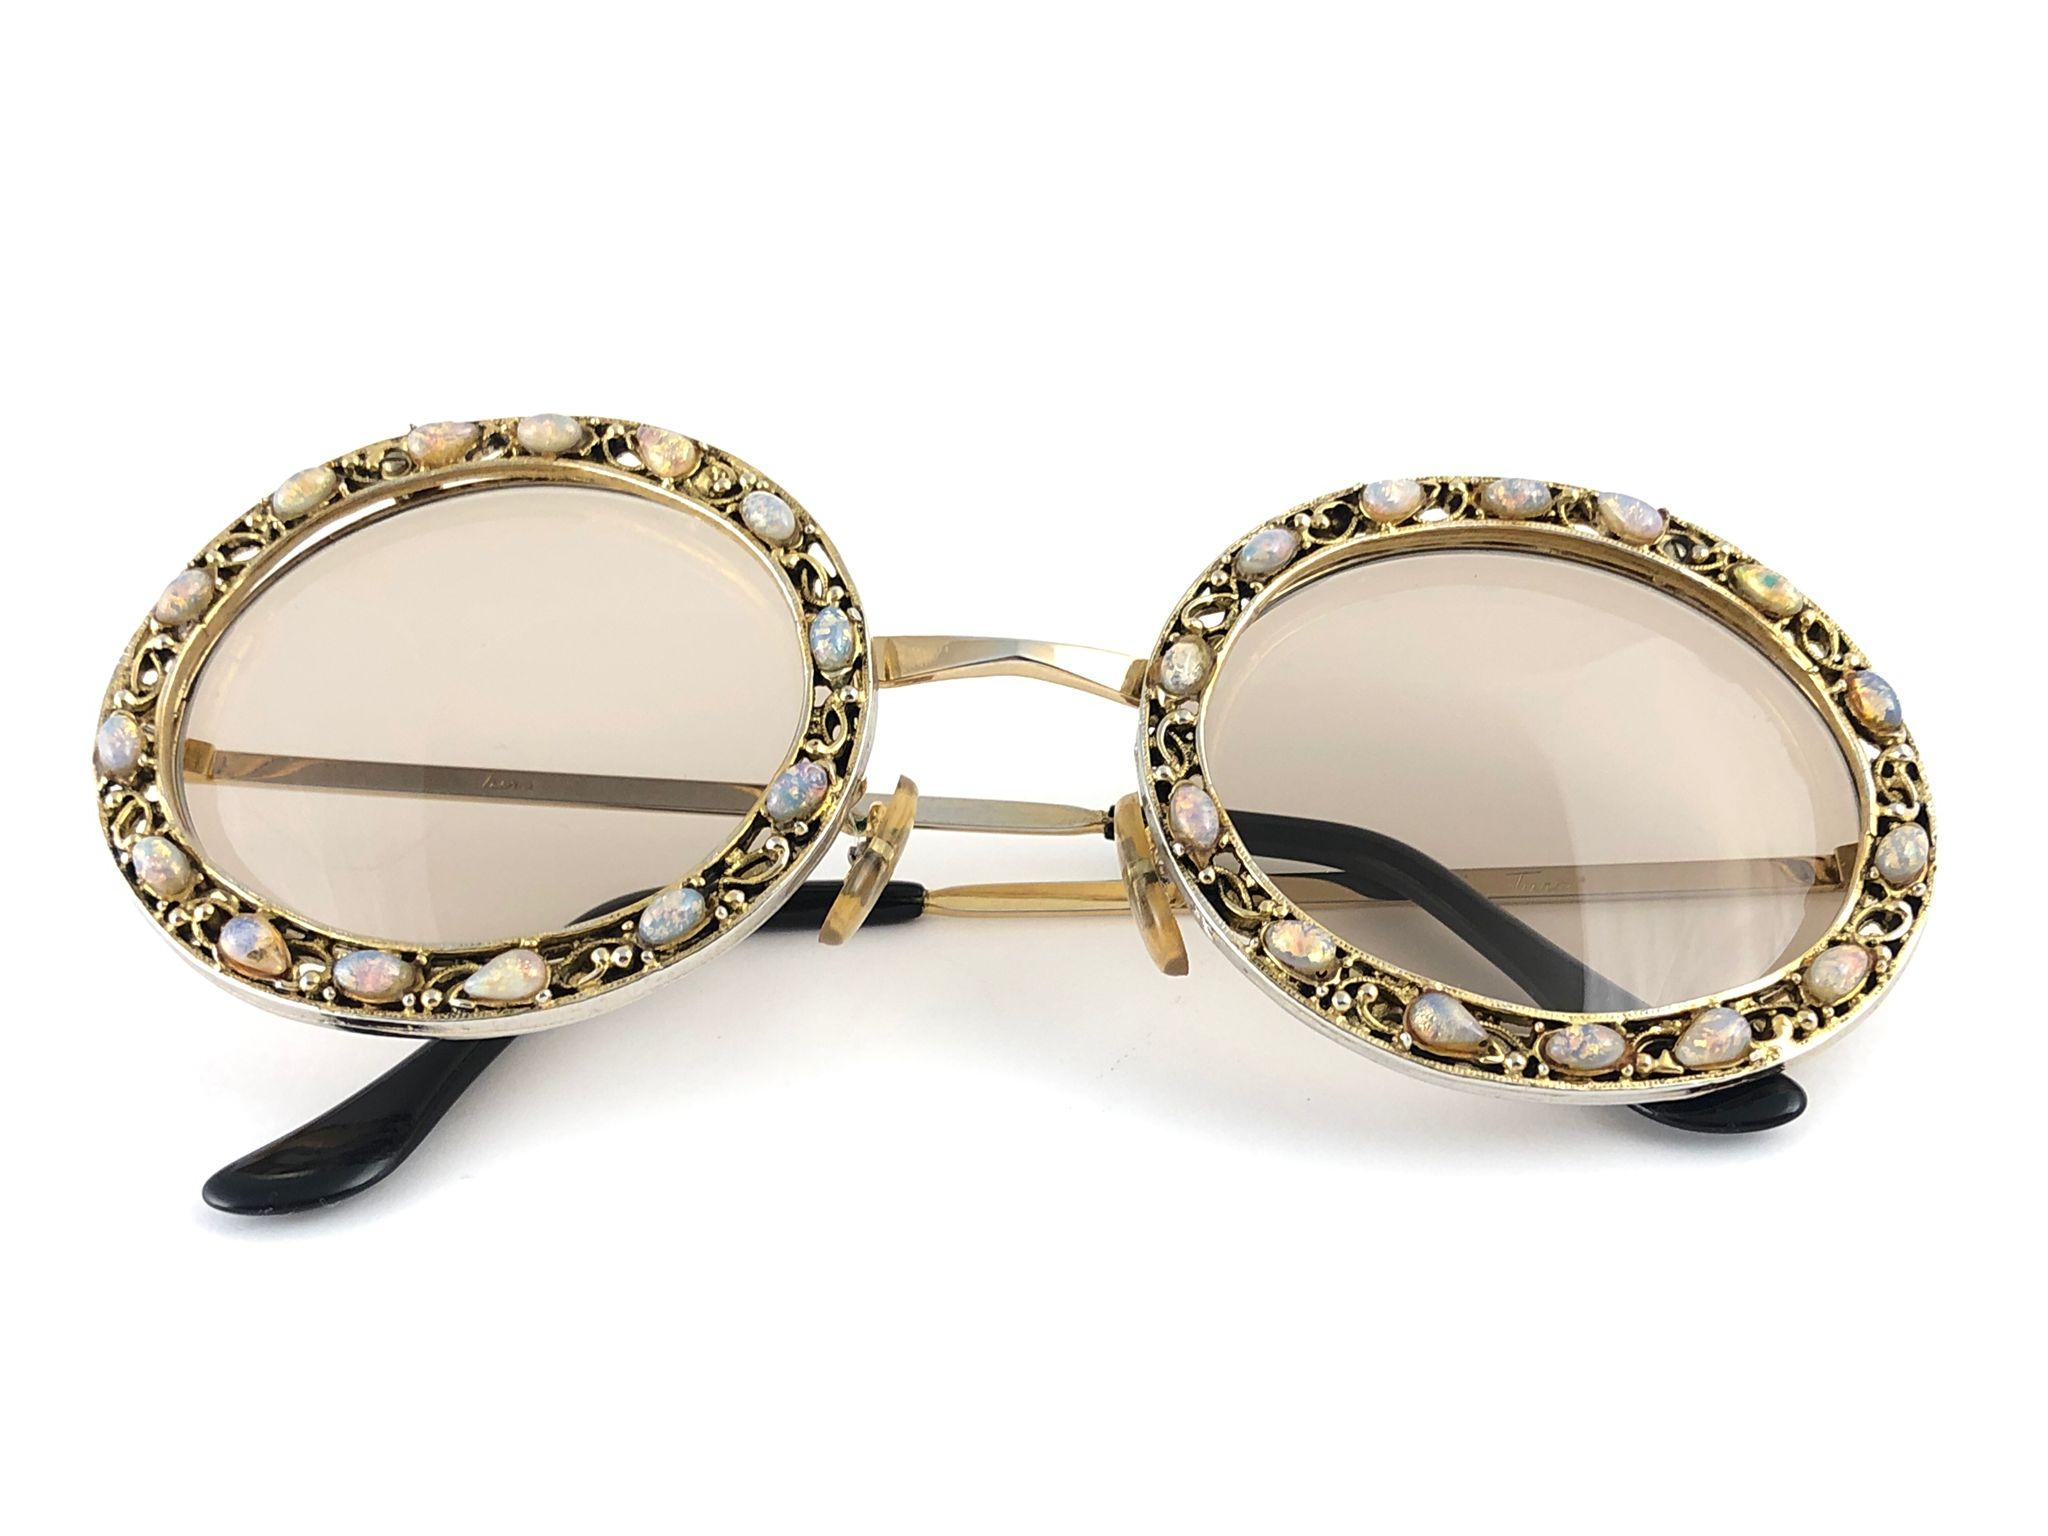 Ultra Rare 1960 Tura Jewelled Opal Accented Frame Archive Dior Sunglasses For Sale 4